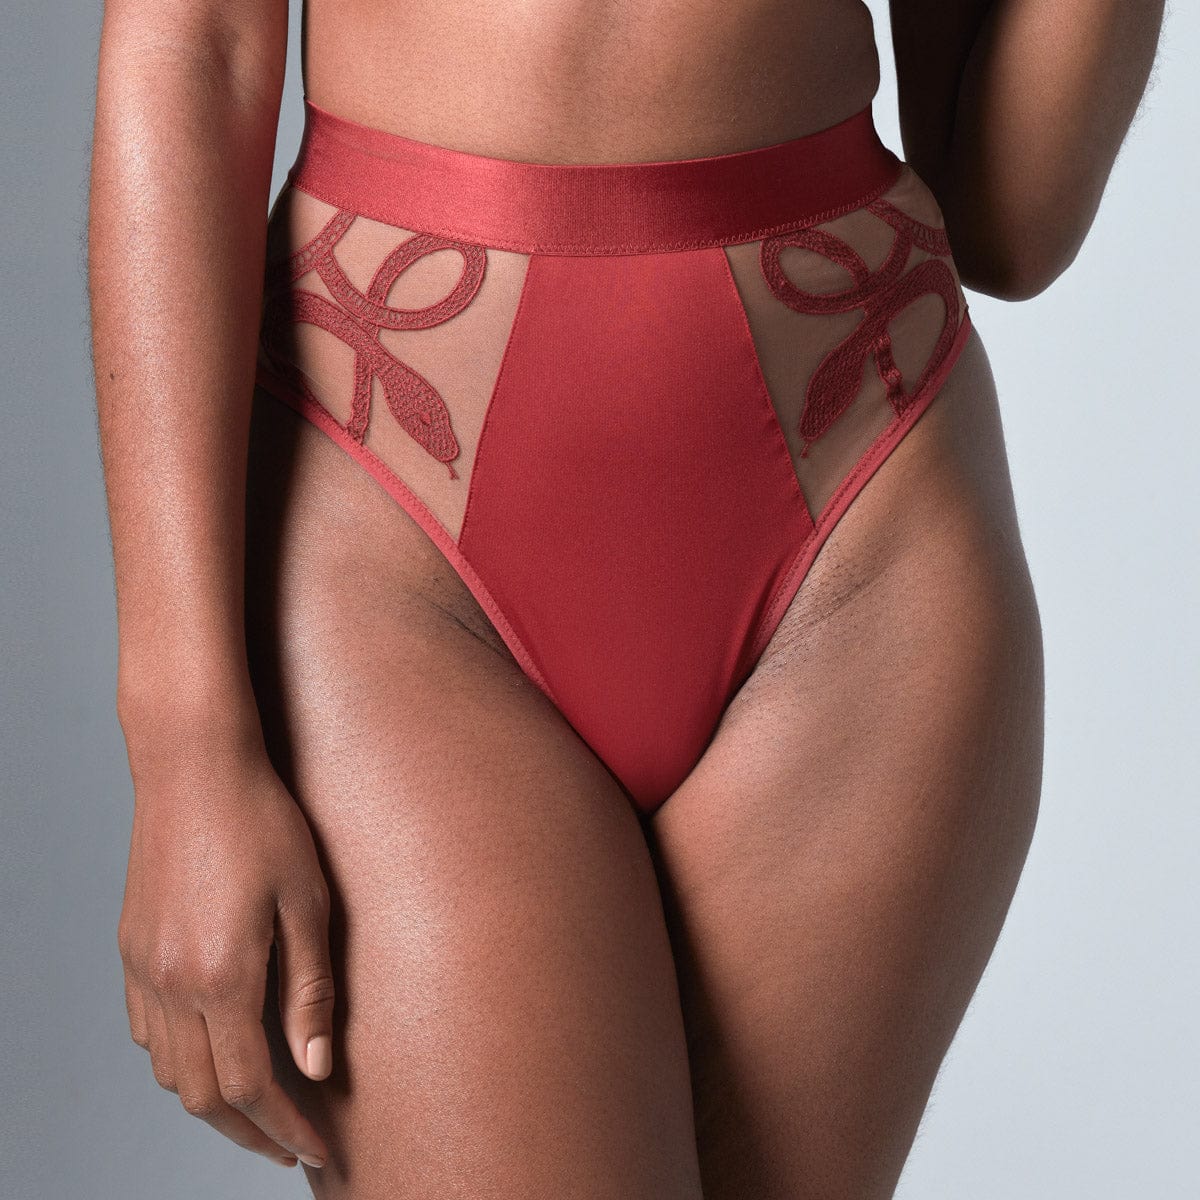 Thistle and Spire Medusa Thong Panty - 101510 (Crimson, Small) 